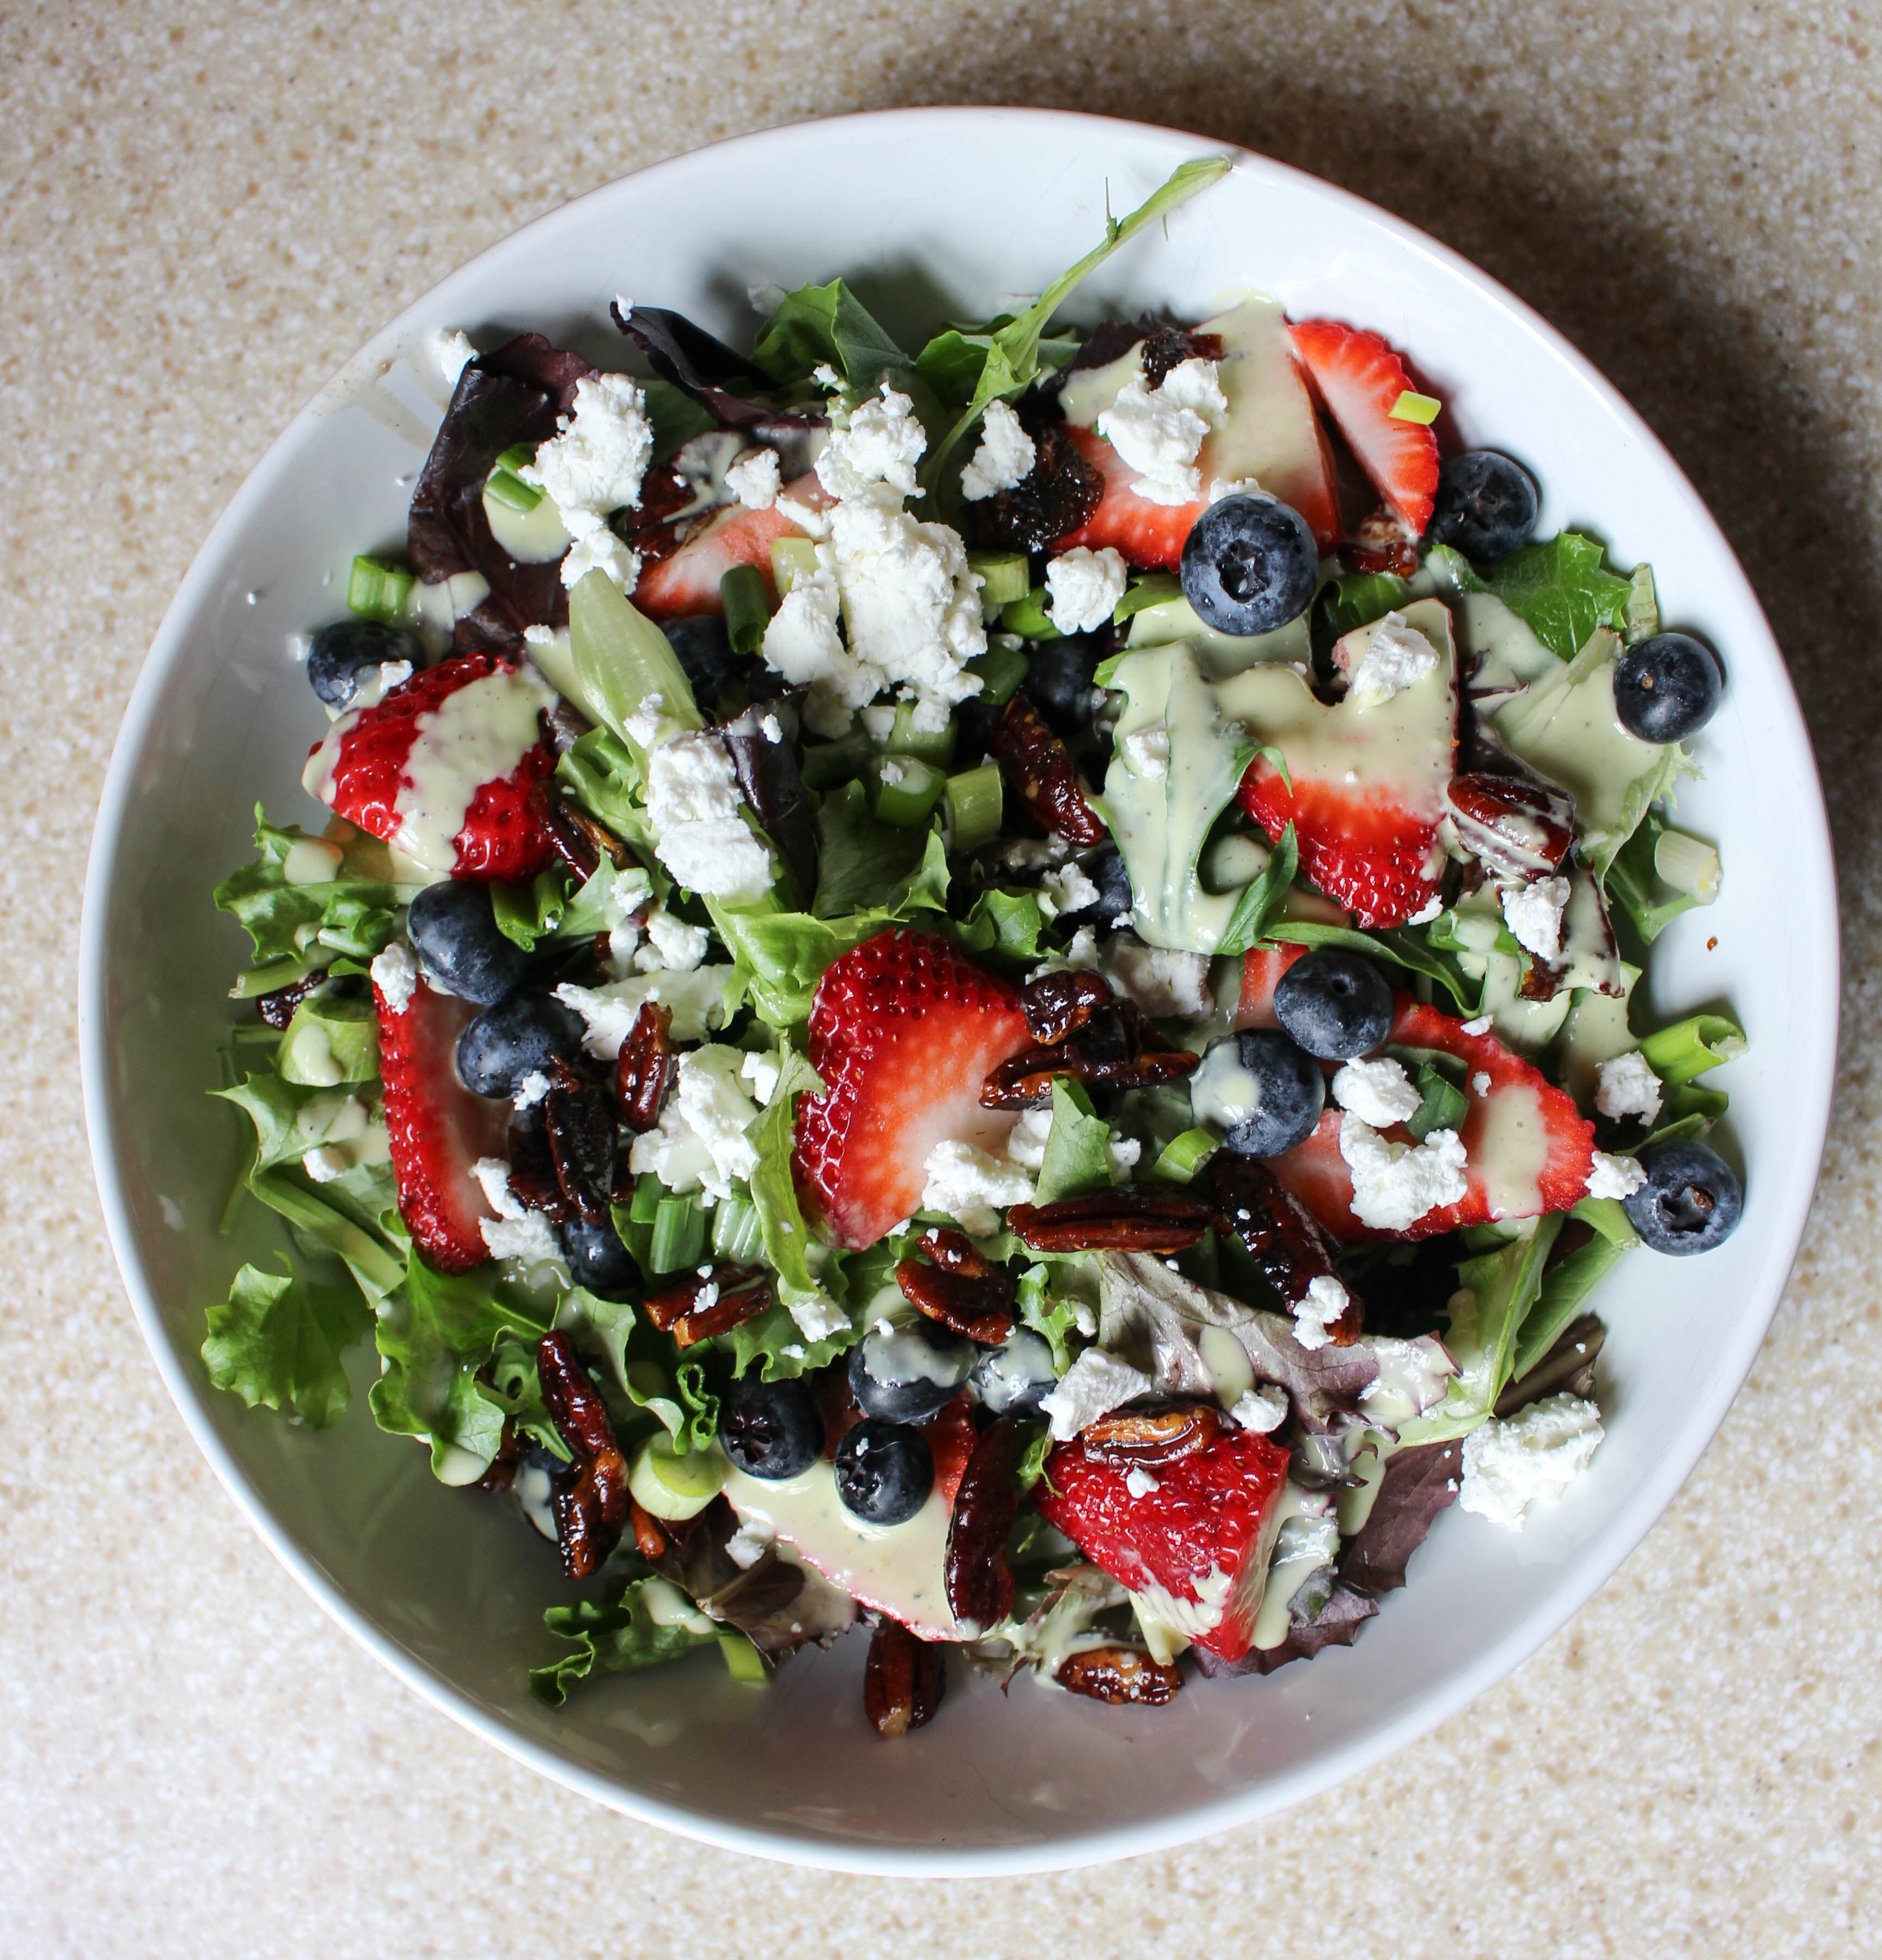 Salad with Spicy Pecans, Berries, & Goat Cheese-Scallion Dressing